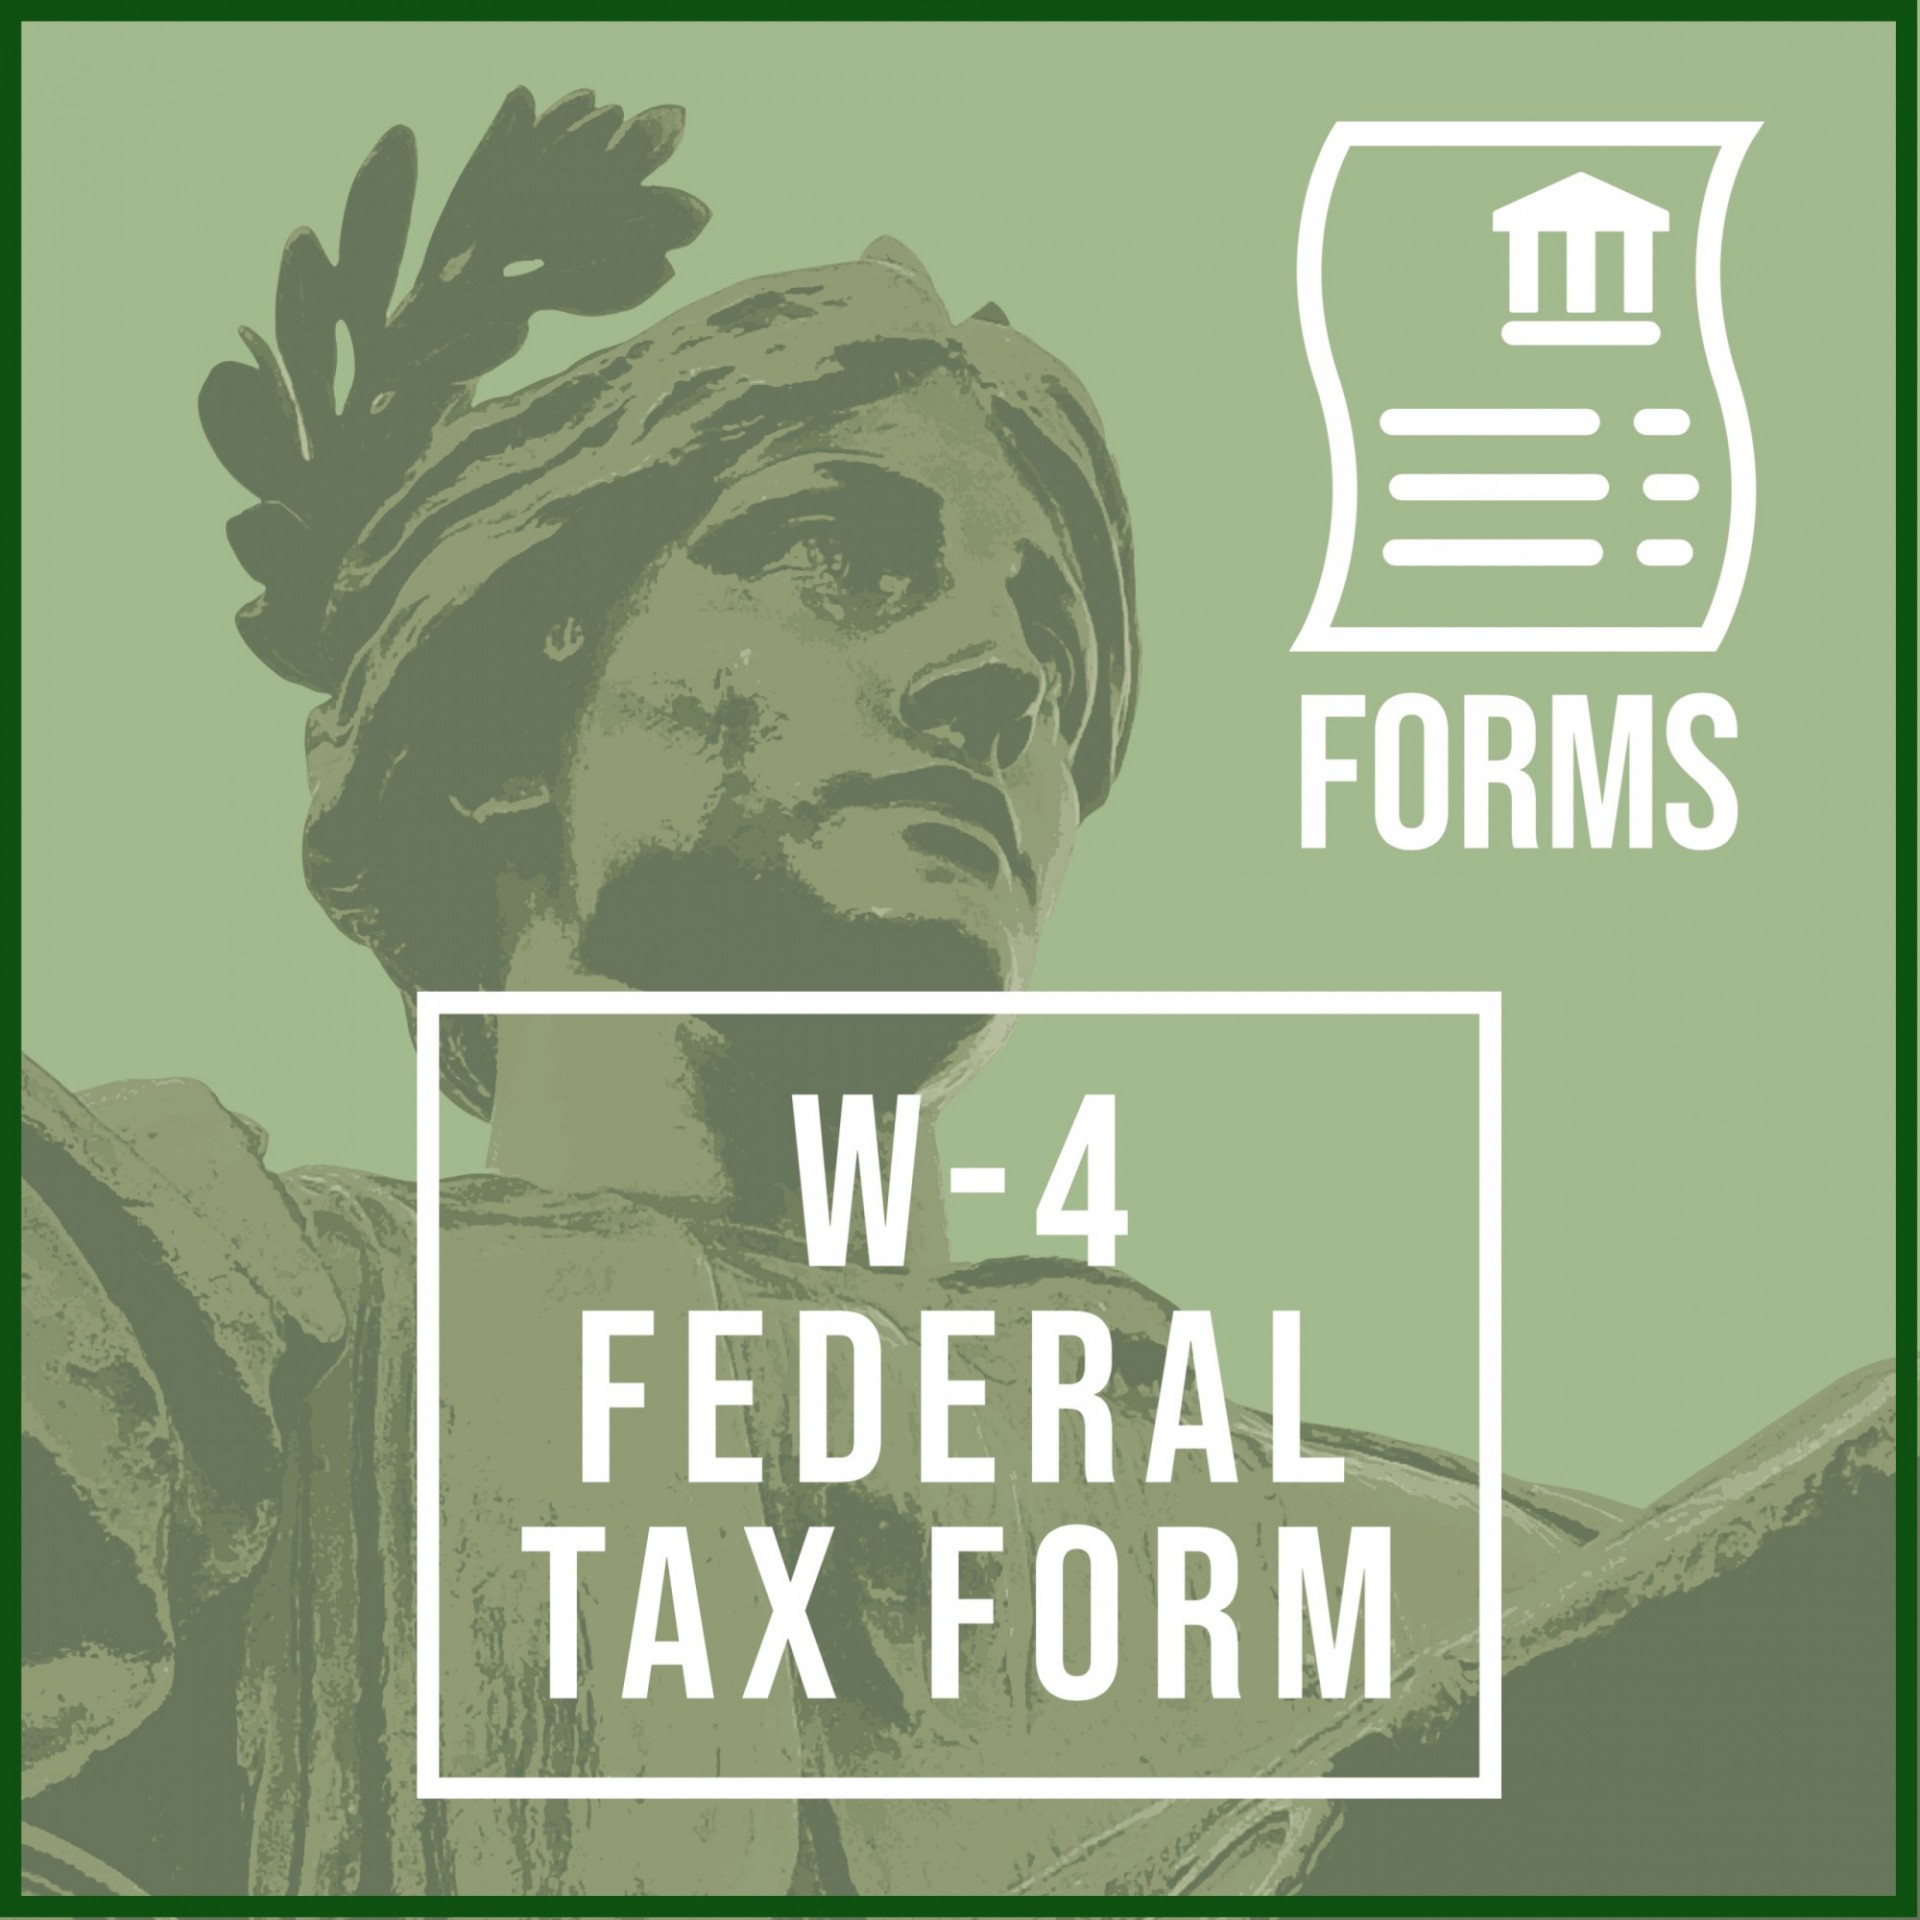 Forms Icon: W-4 Federal Tax Form